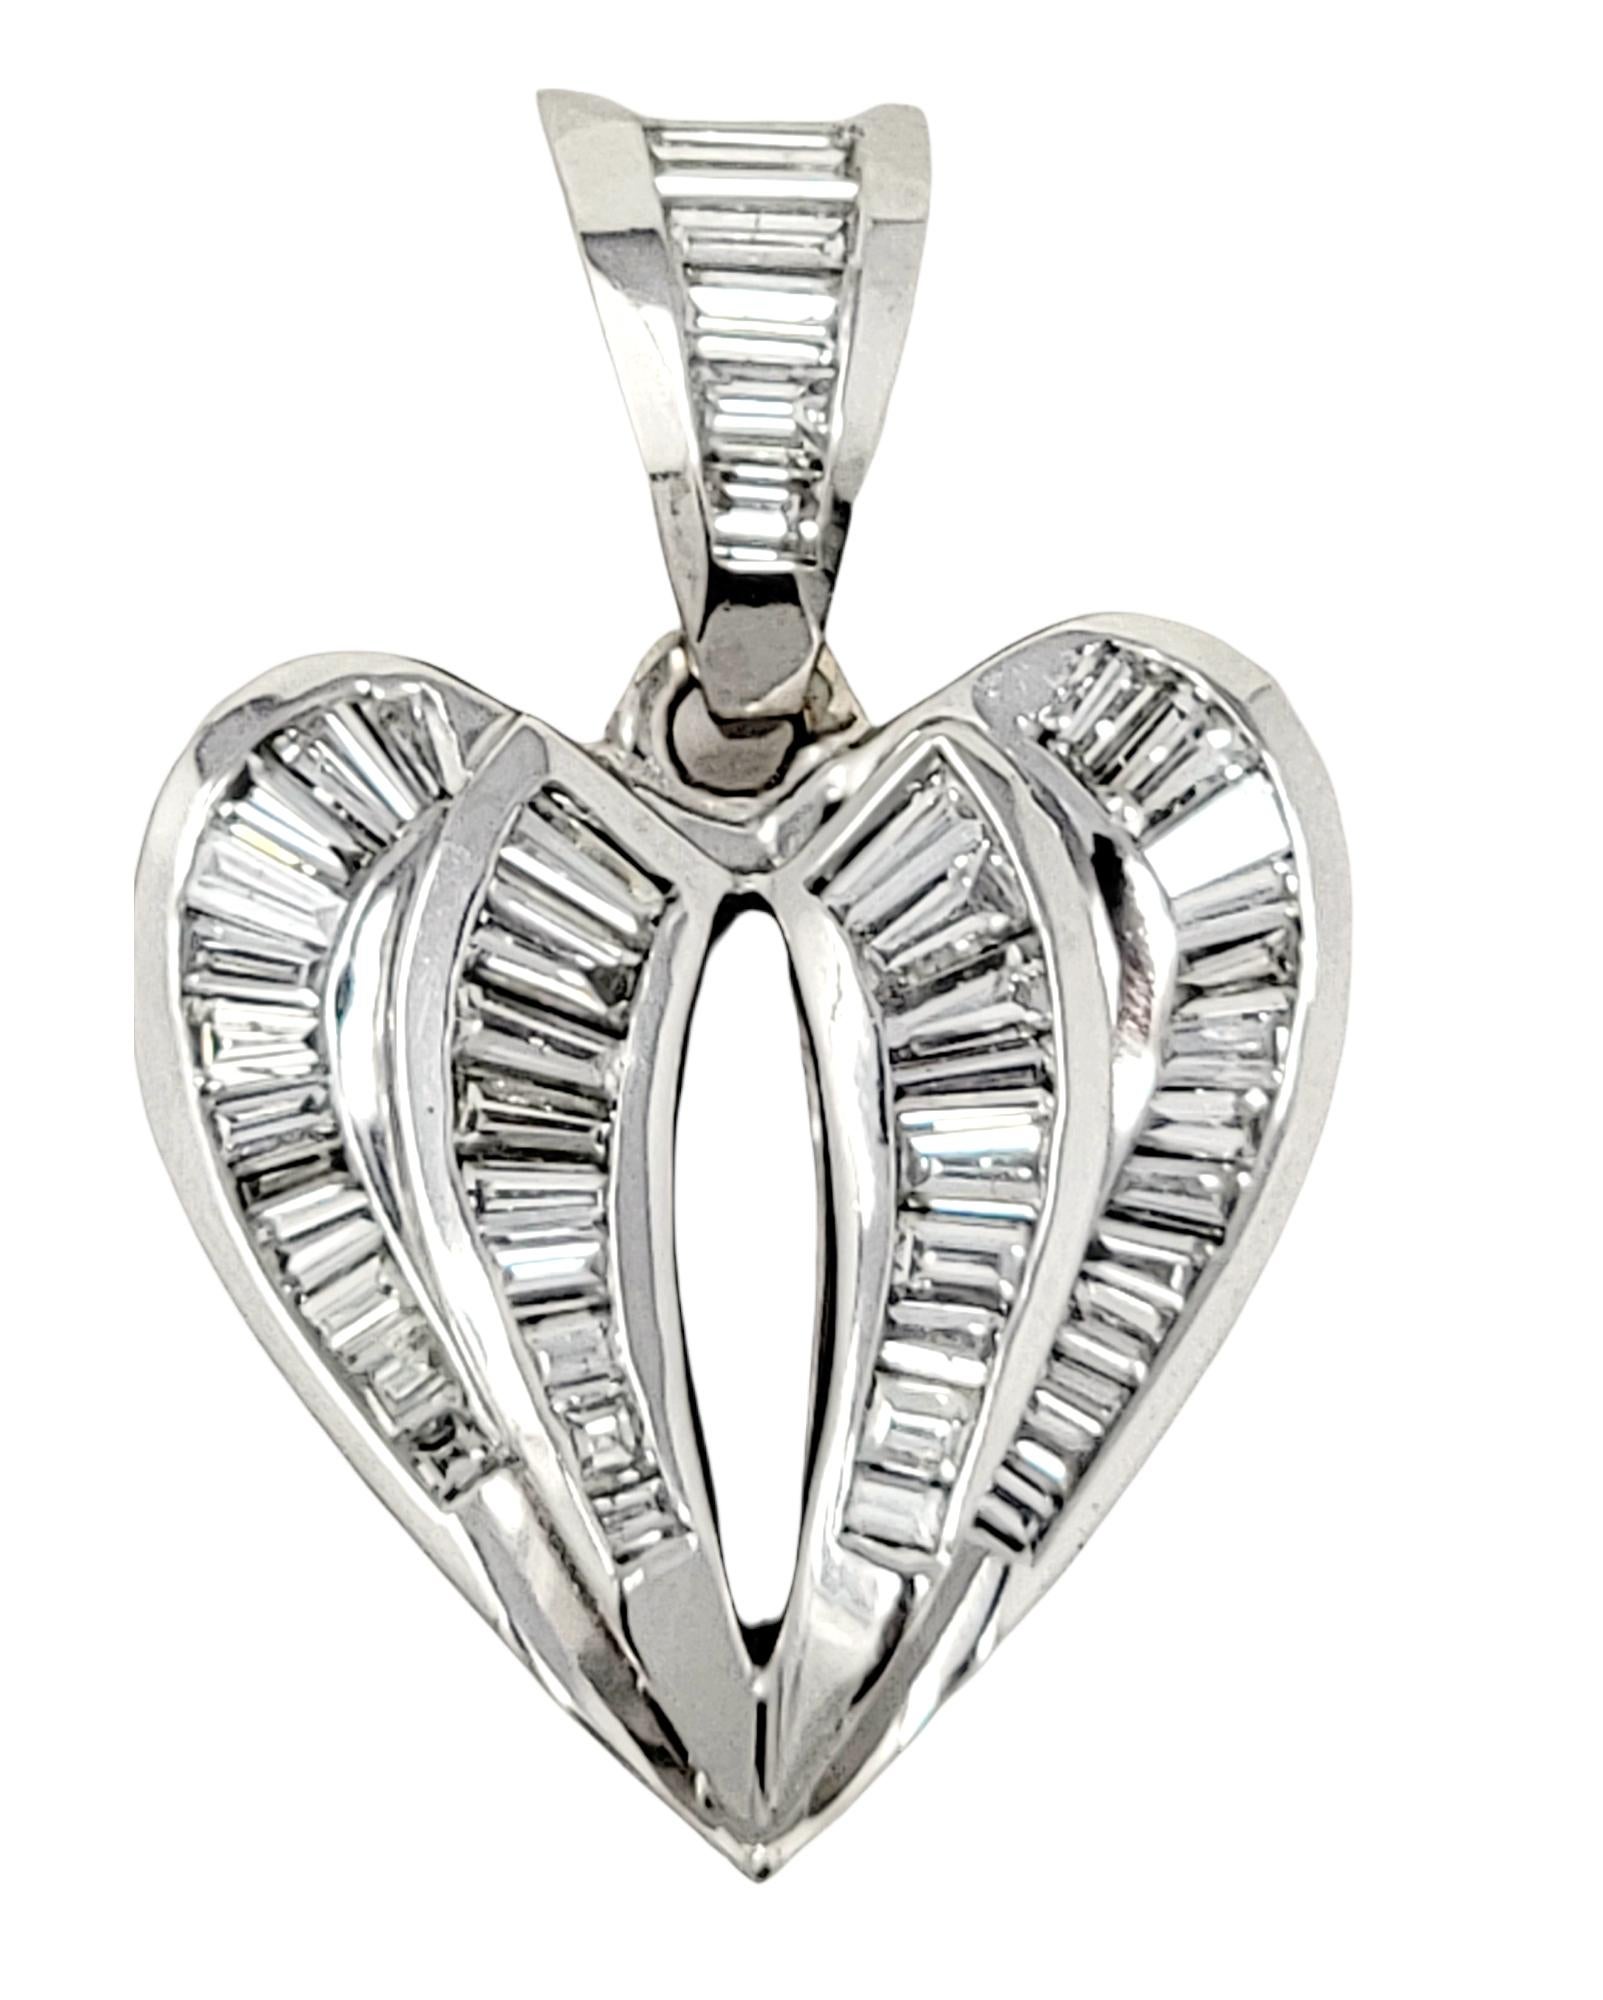 Gorgeous, glittering heart shaped pendant will absolutely light up her neck! The polished white gold paired with the icy white baguette and square diamonds, makes for a stunningly sparkly piece. The classic heart shape remains timeless, ensuring